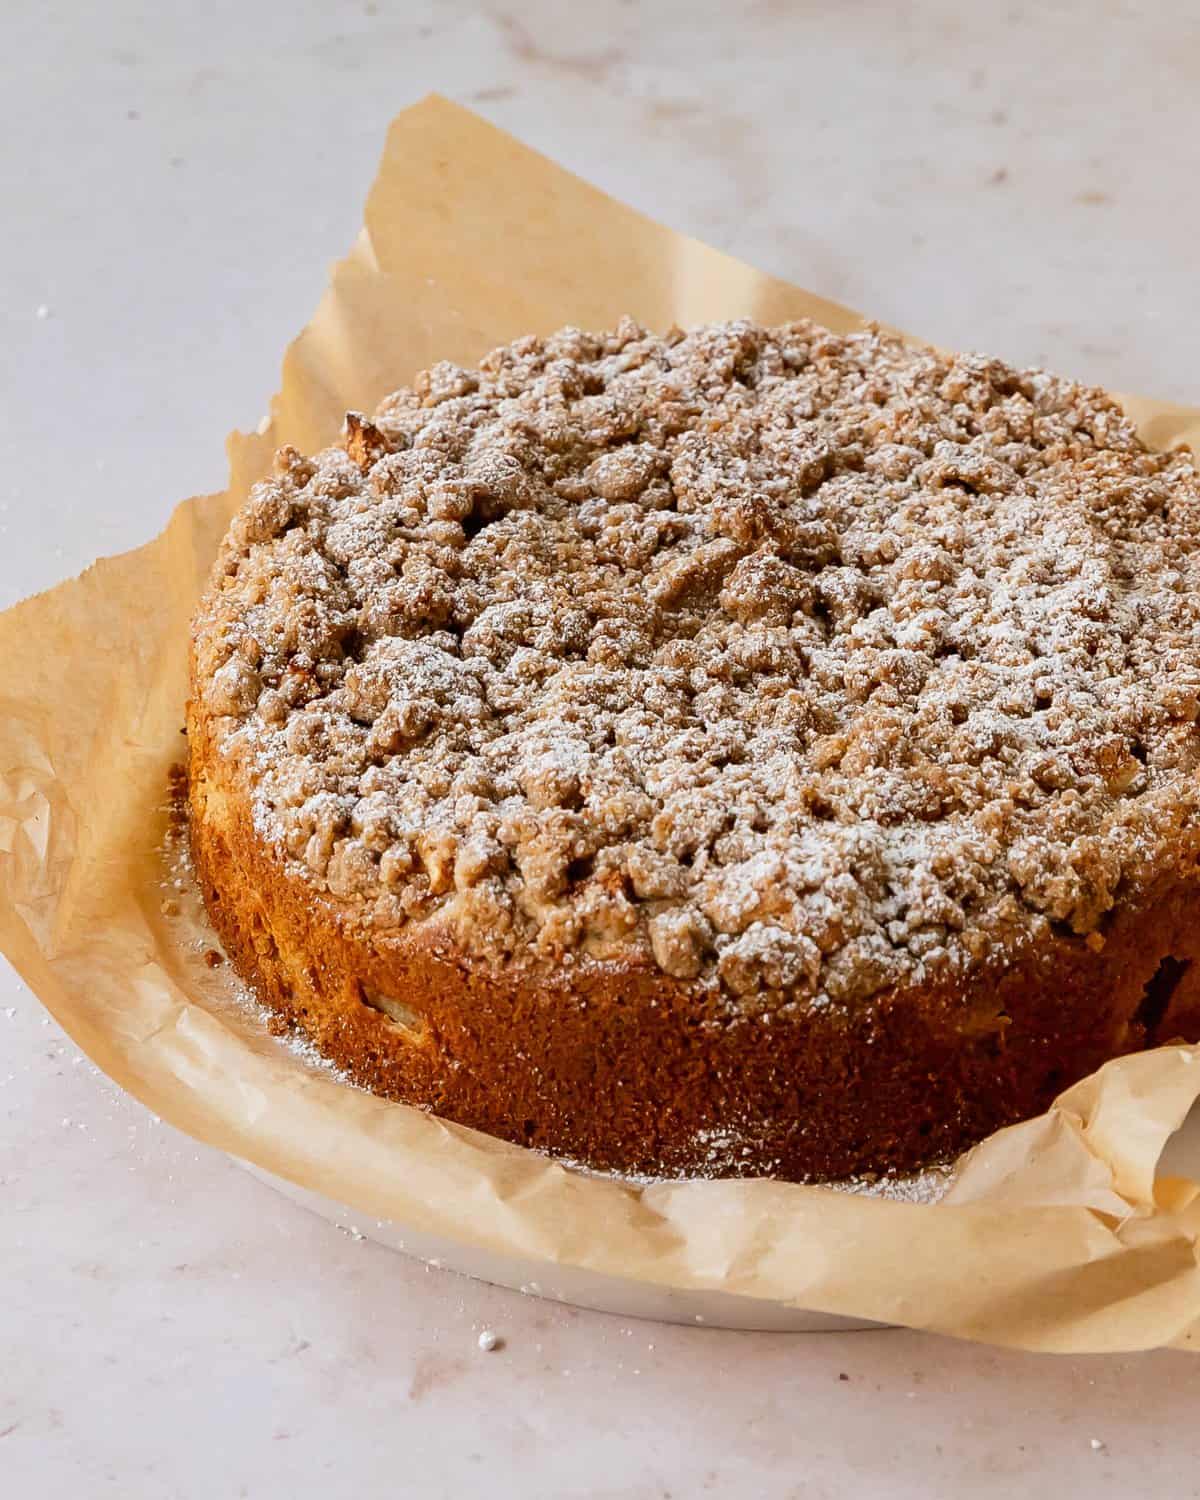 Apple crumble cake is a moist and buttery cinnamon and vanilla crumb cake filled with chunks of sweet and tart apples. It’s topped with a crunchy cinnamon spiced crumble that is the perfect complement to the cozy cinnamon spiced apples. Make this apple coffee cream coffee cake for a wonderfully delicious fall breakfast or dessert. 